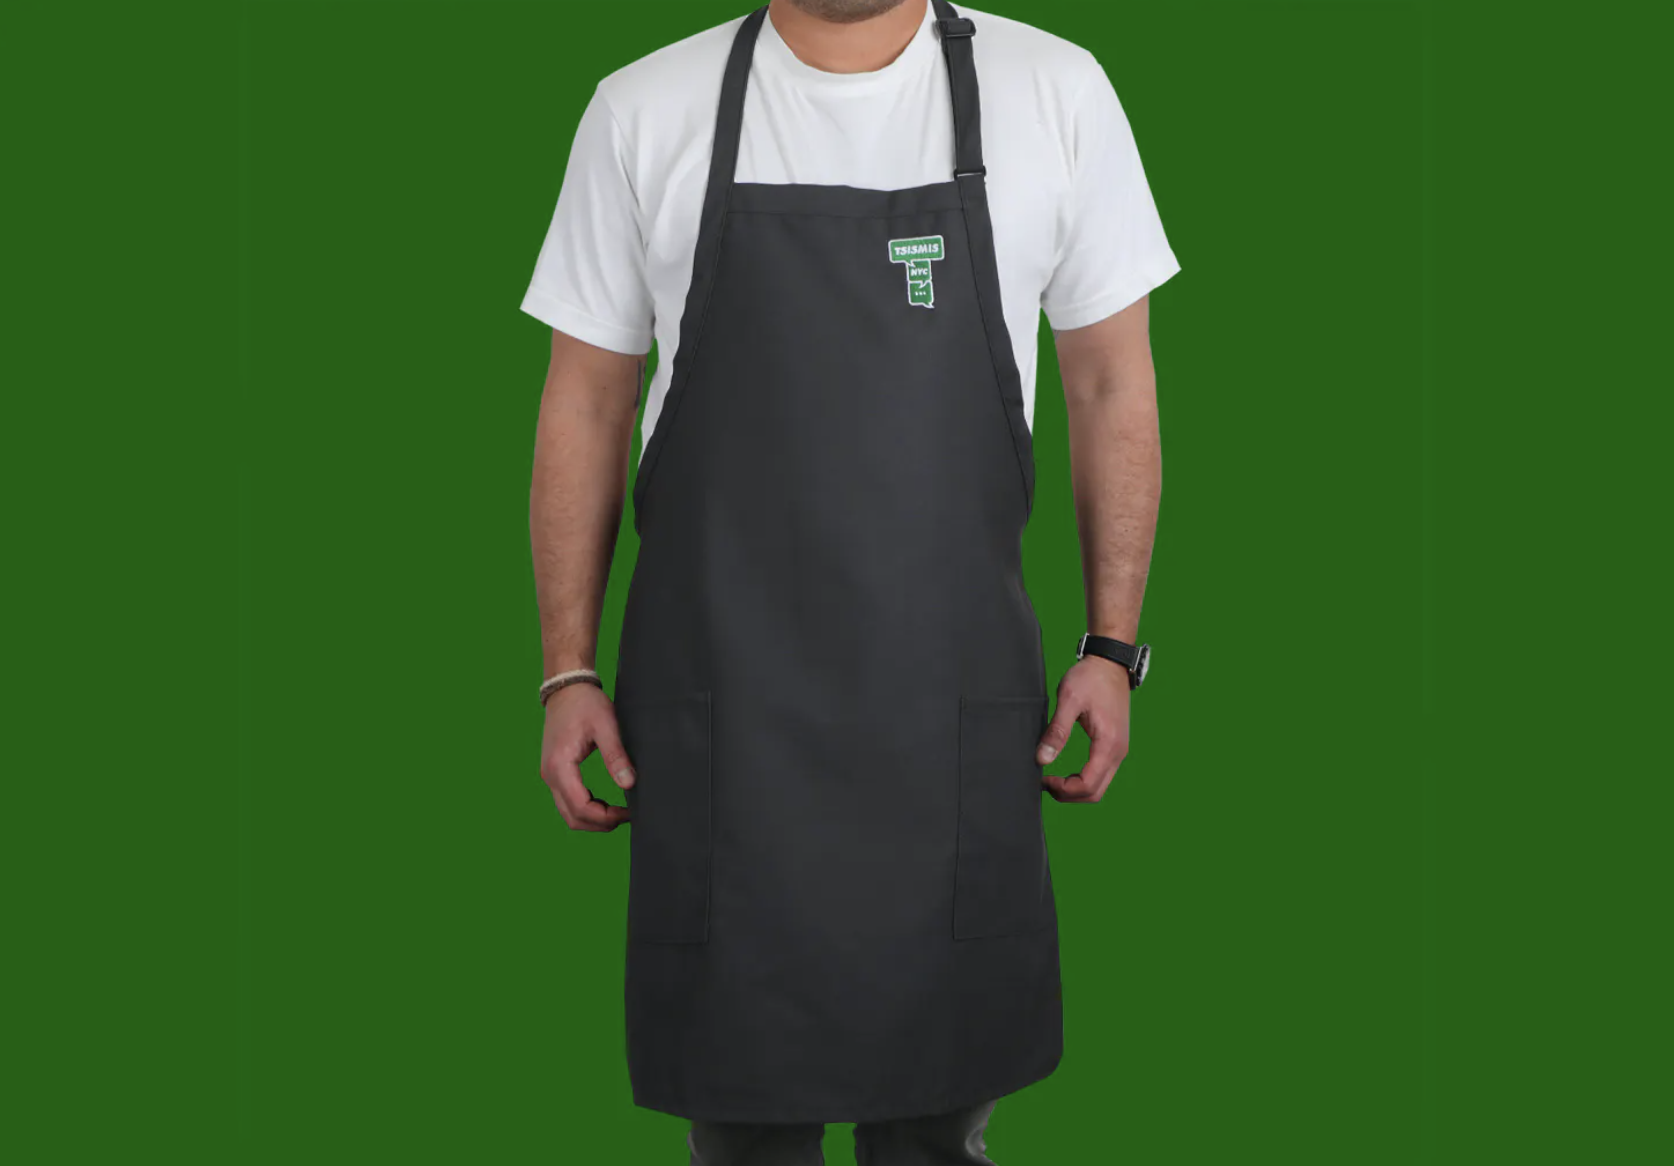 A person wearing the charcoal gray apron